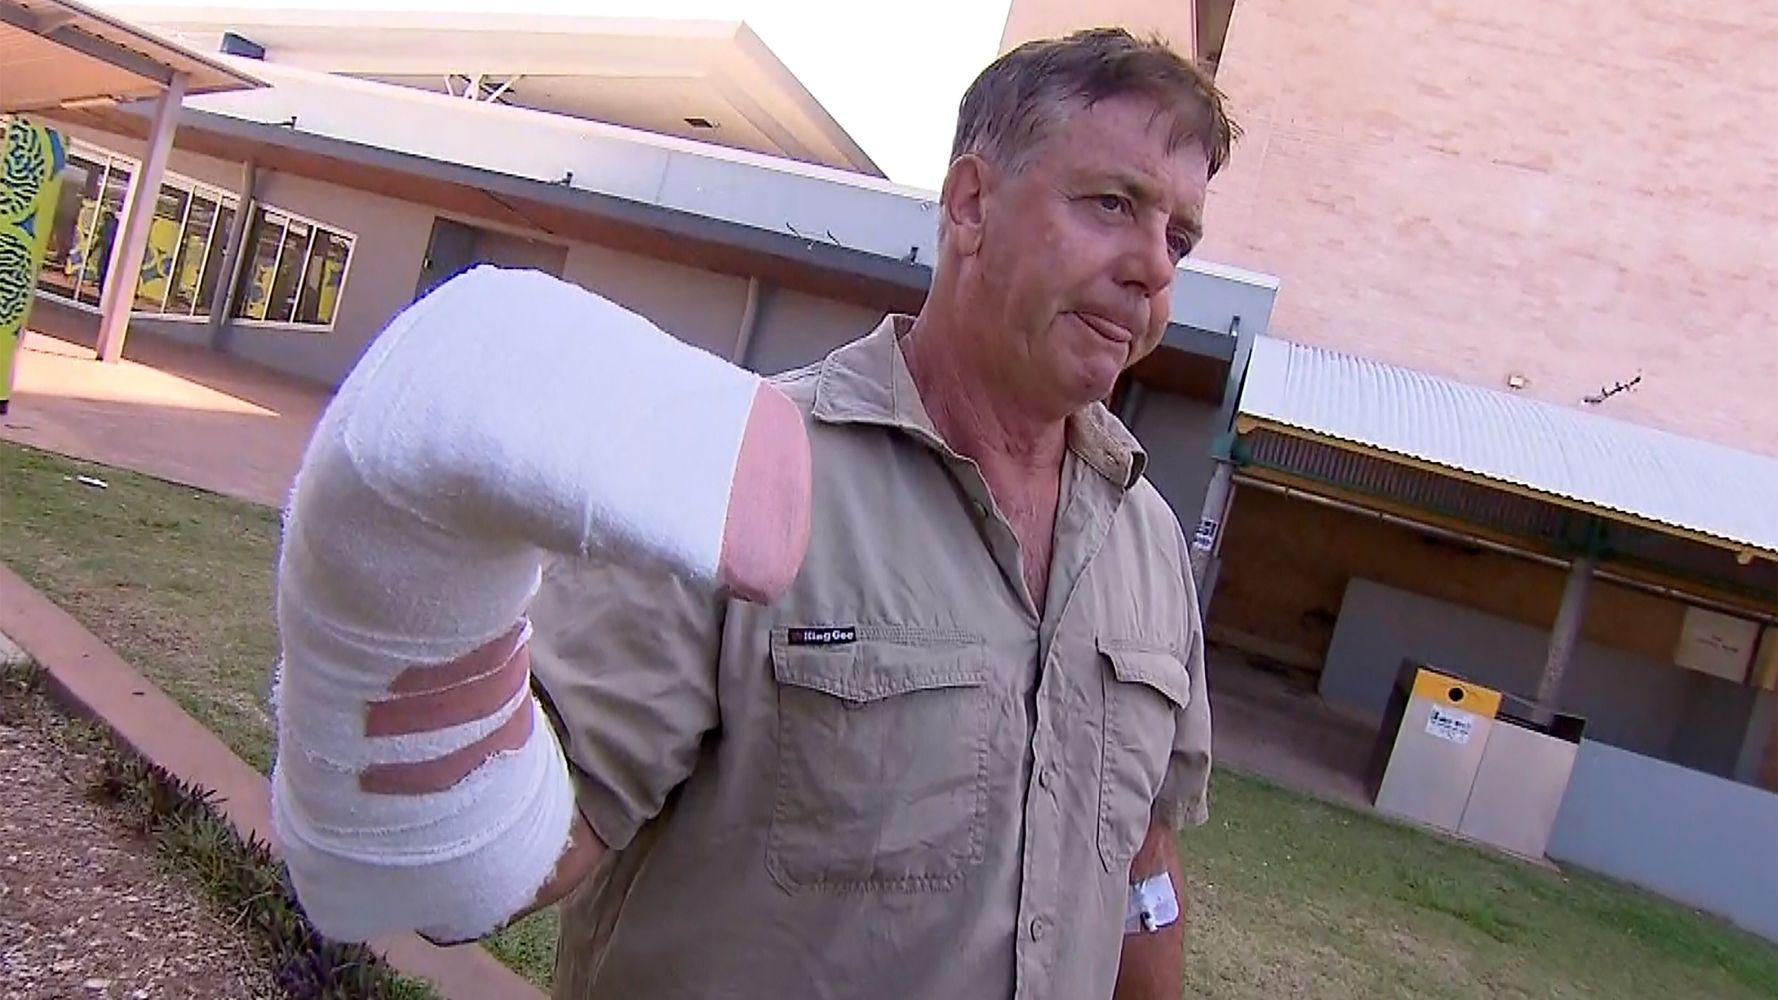 Australian Man's Hand Is 'A Bit Sore' After Attack By Jumping Crocodile